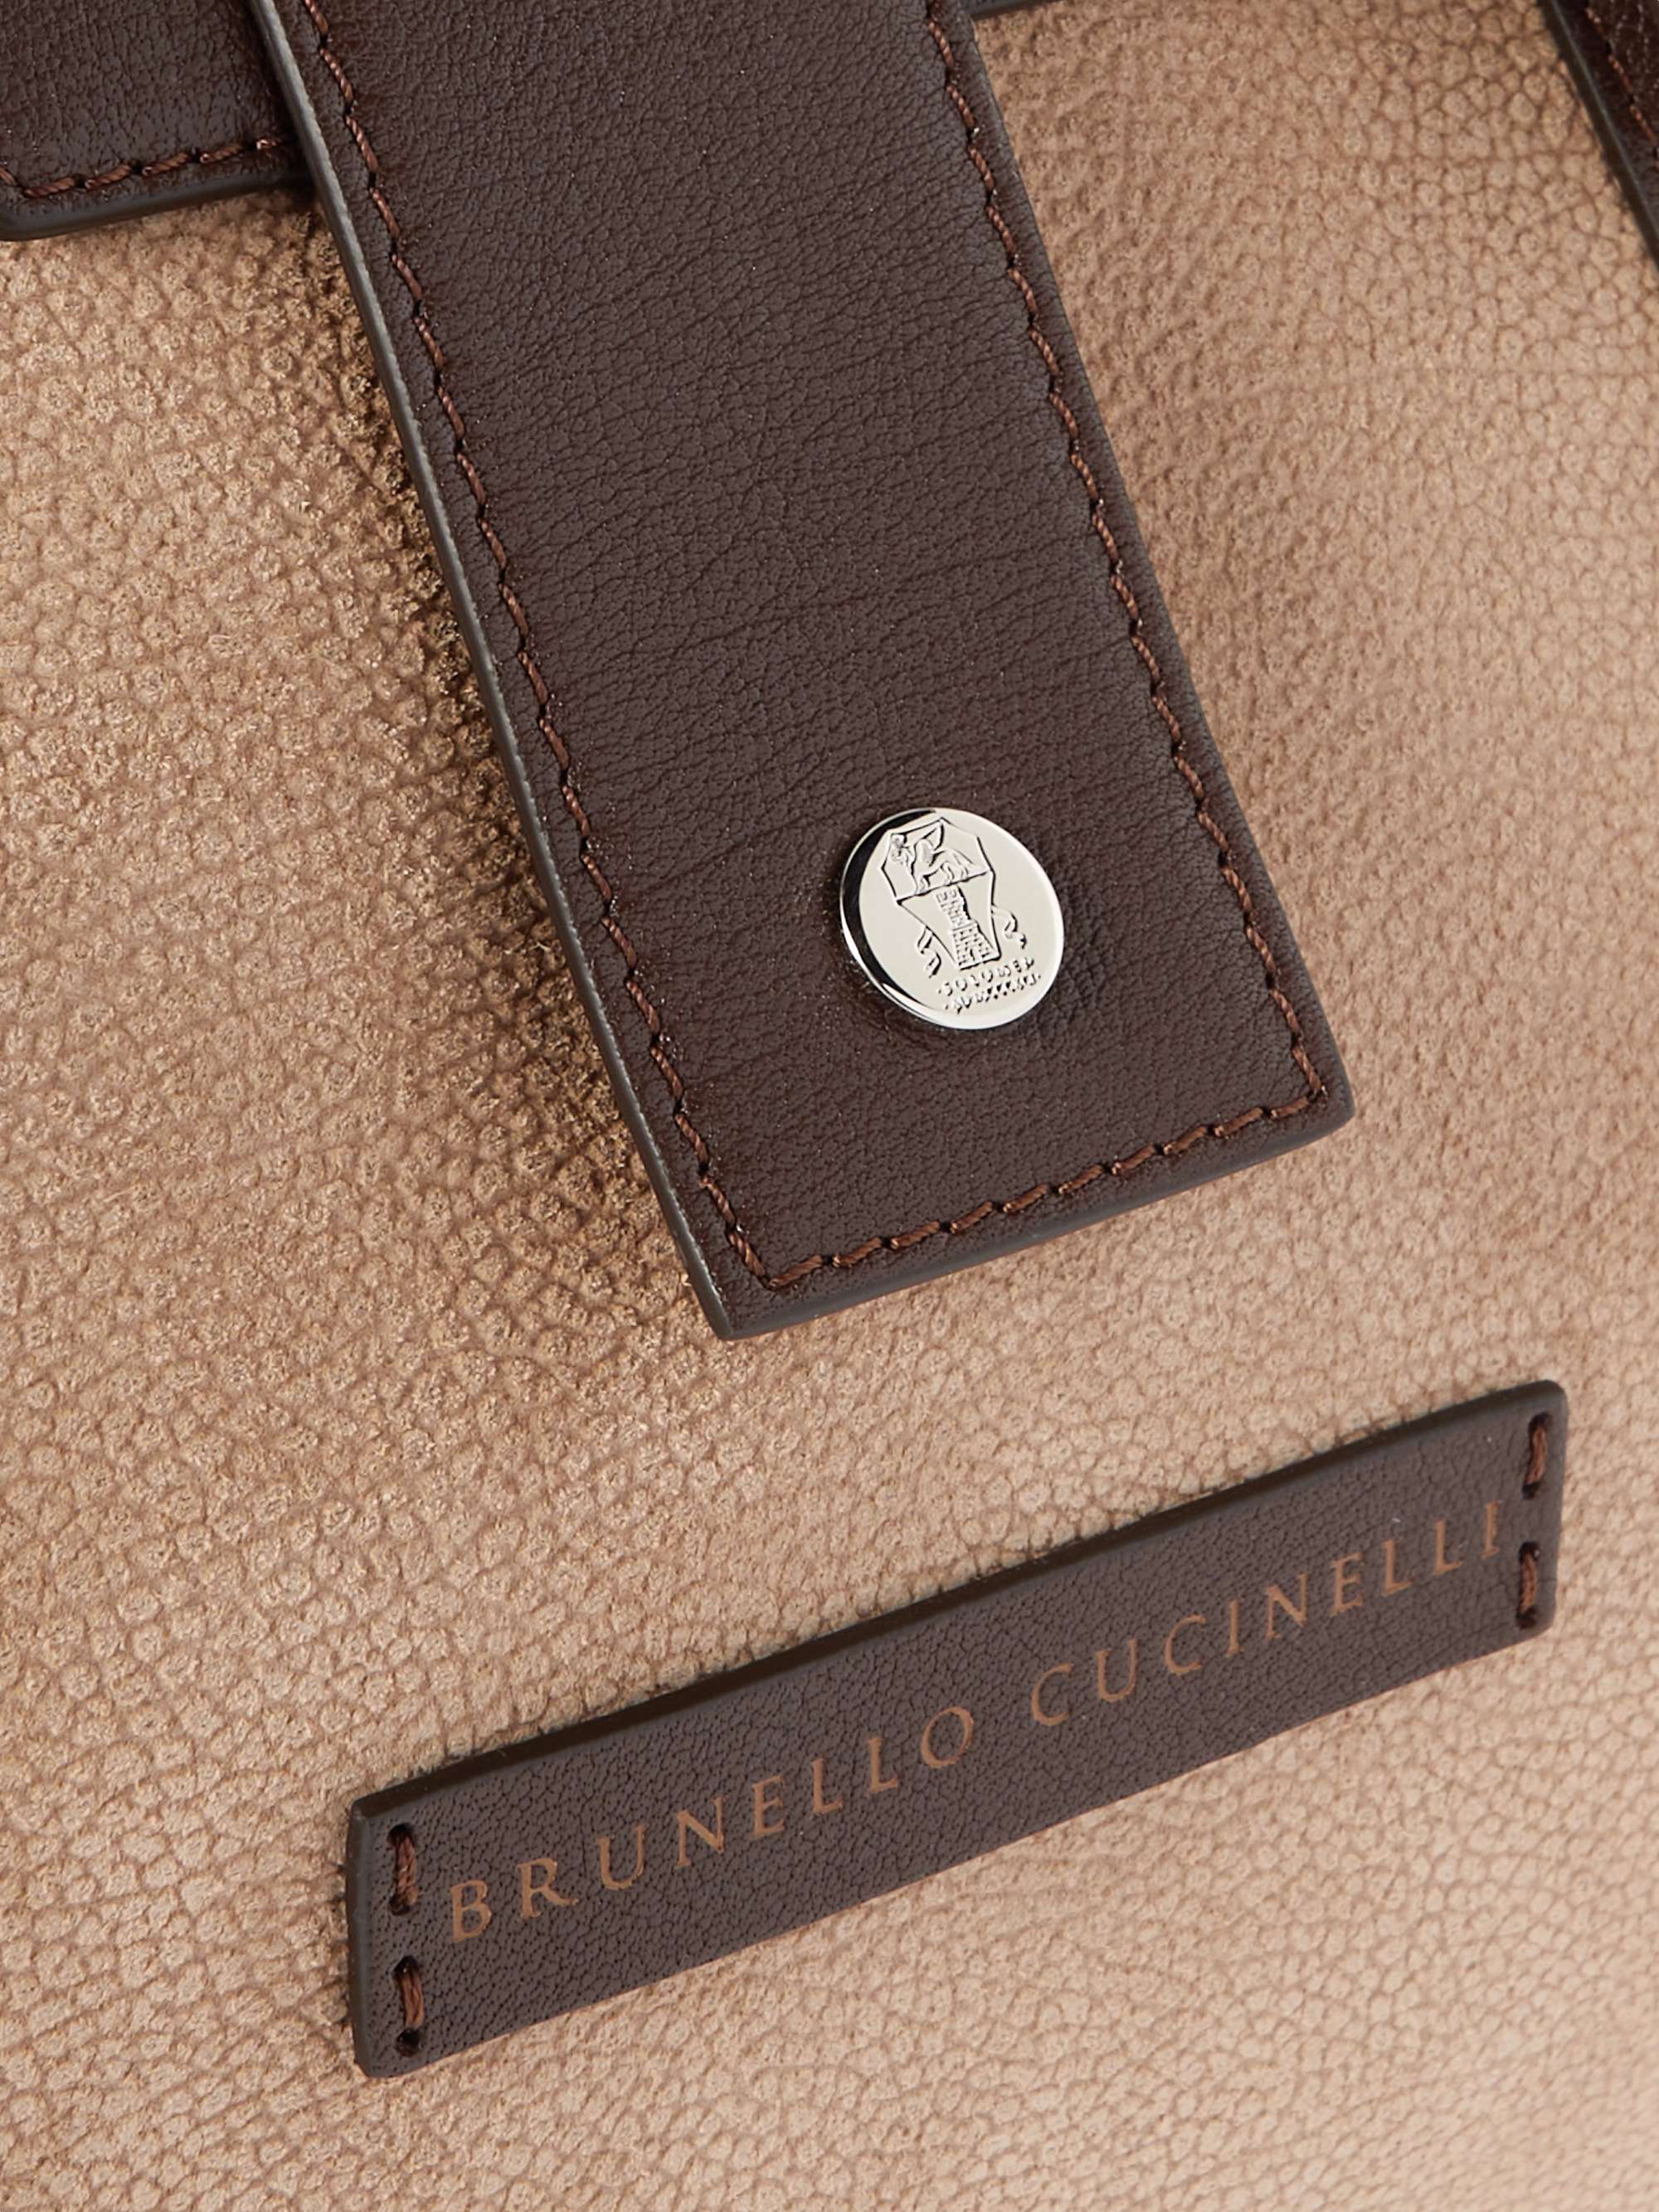 BRUNELLO CUCINELLI Leather-Trimmed Suede Weekend Bag